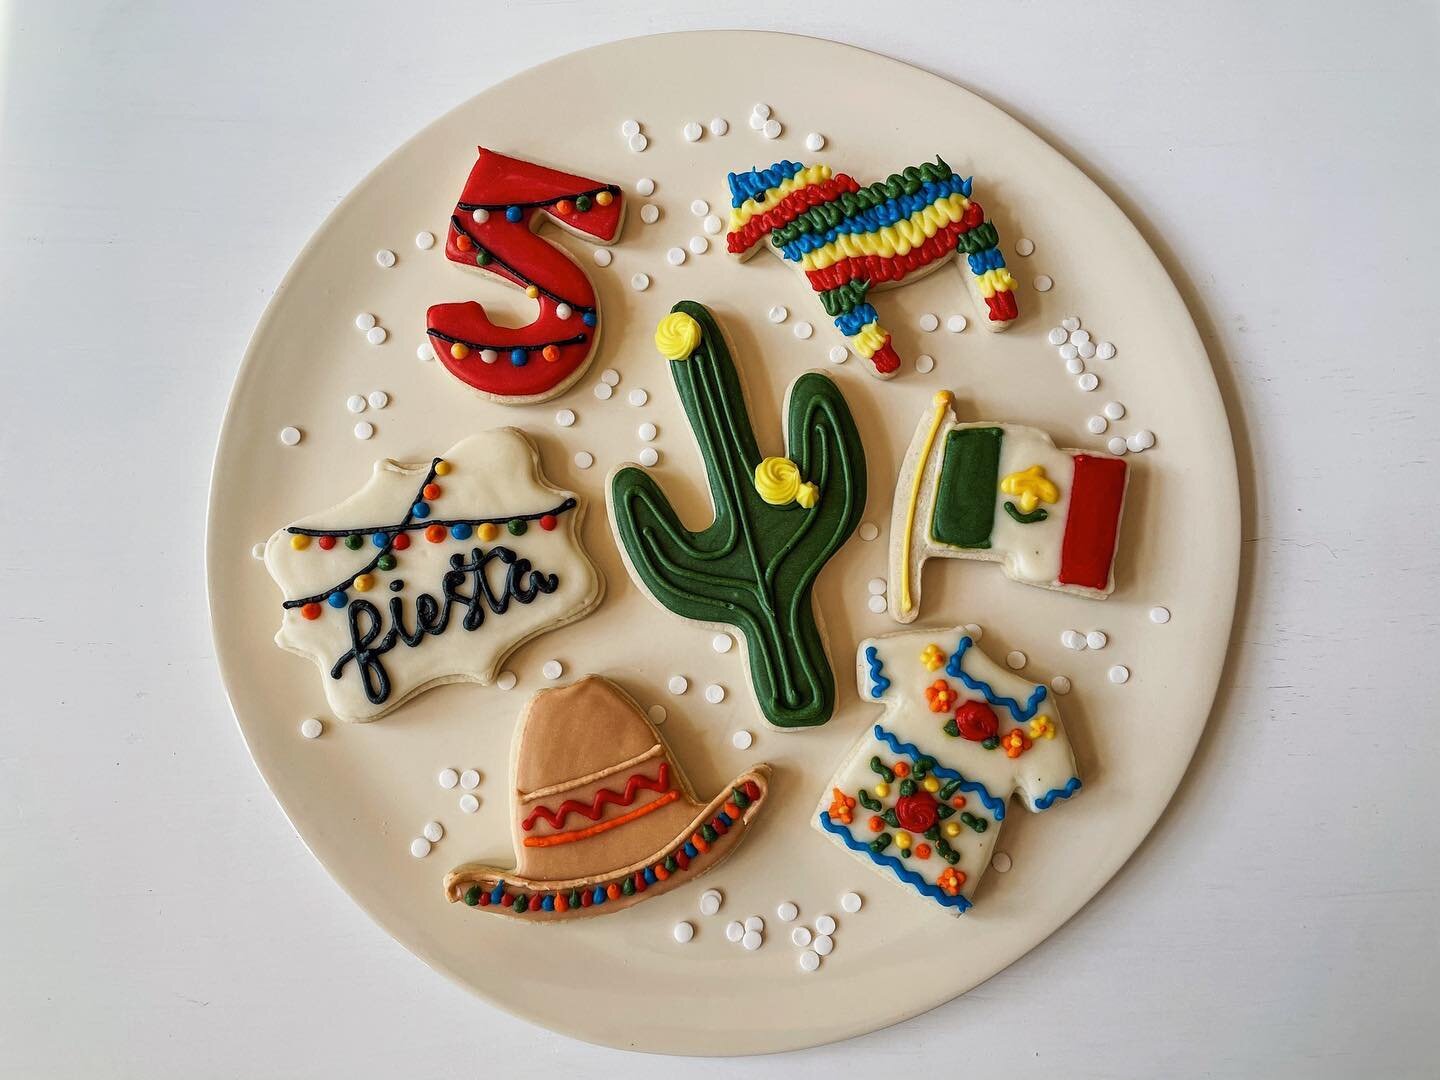 We&rsquo;re doing something new for Cinco de Mayo this year! 

We&rsquo;ve got a whole new set of sugar cookies, an incredibly delicious Lime Cake with Lime Curd and Salted Lime Icing (cupcakes, too, of course!), Mexican Wedding Cookies AND A TACO CA